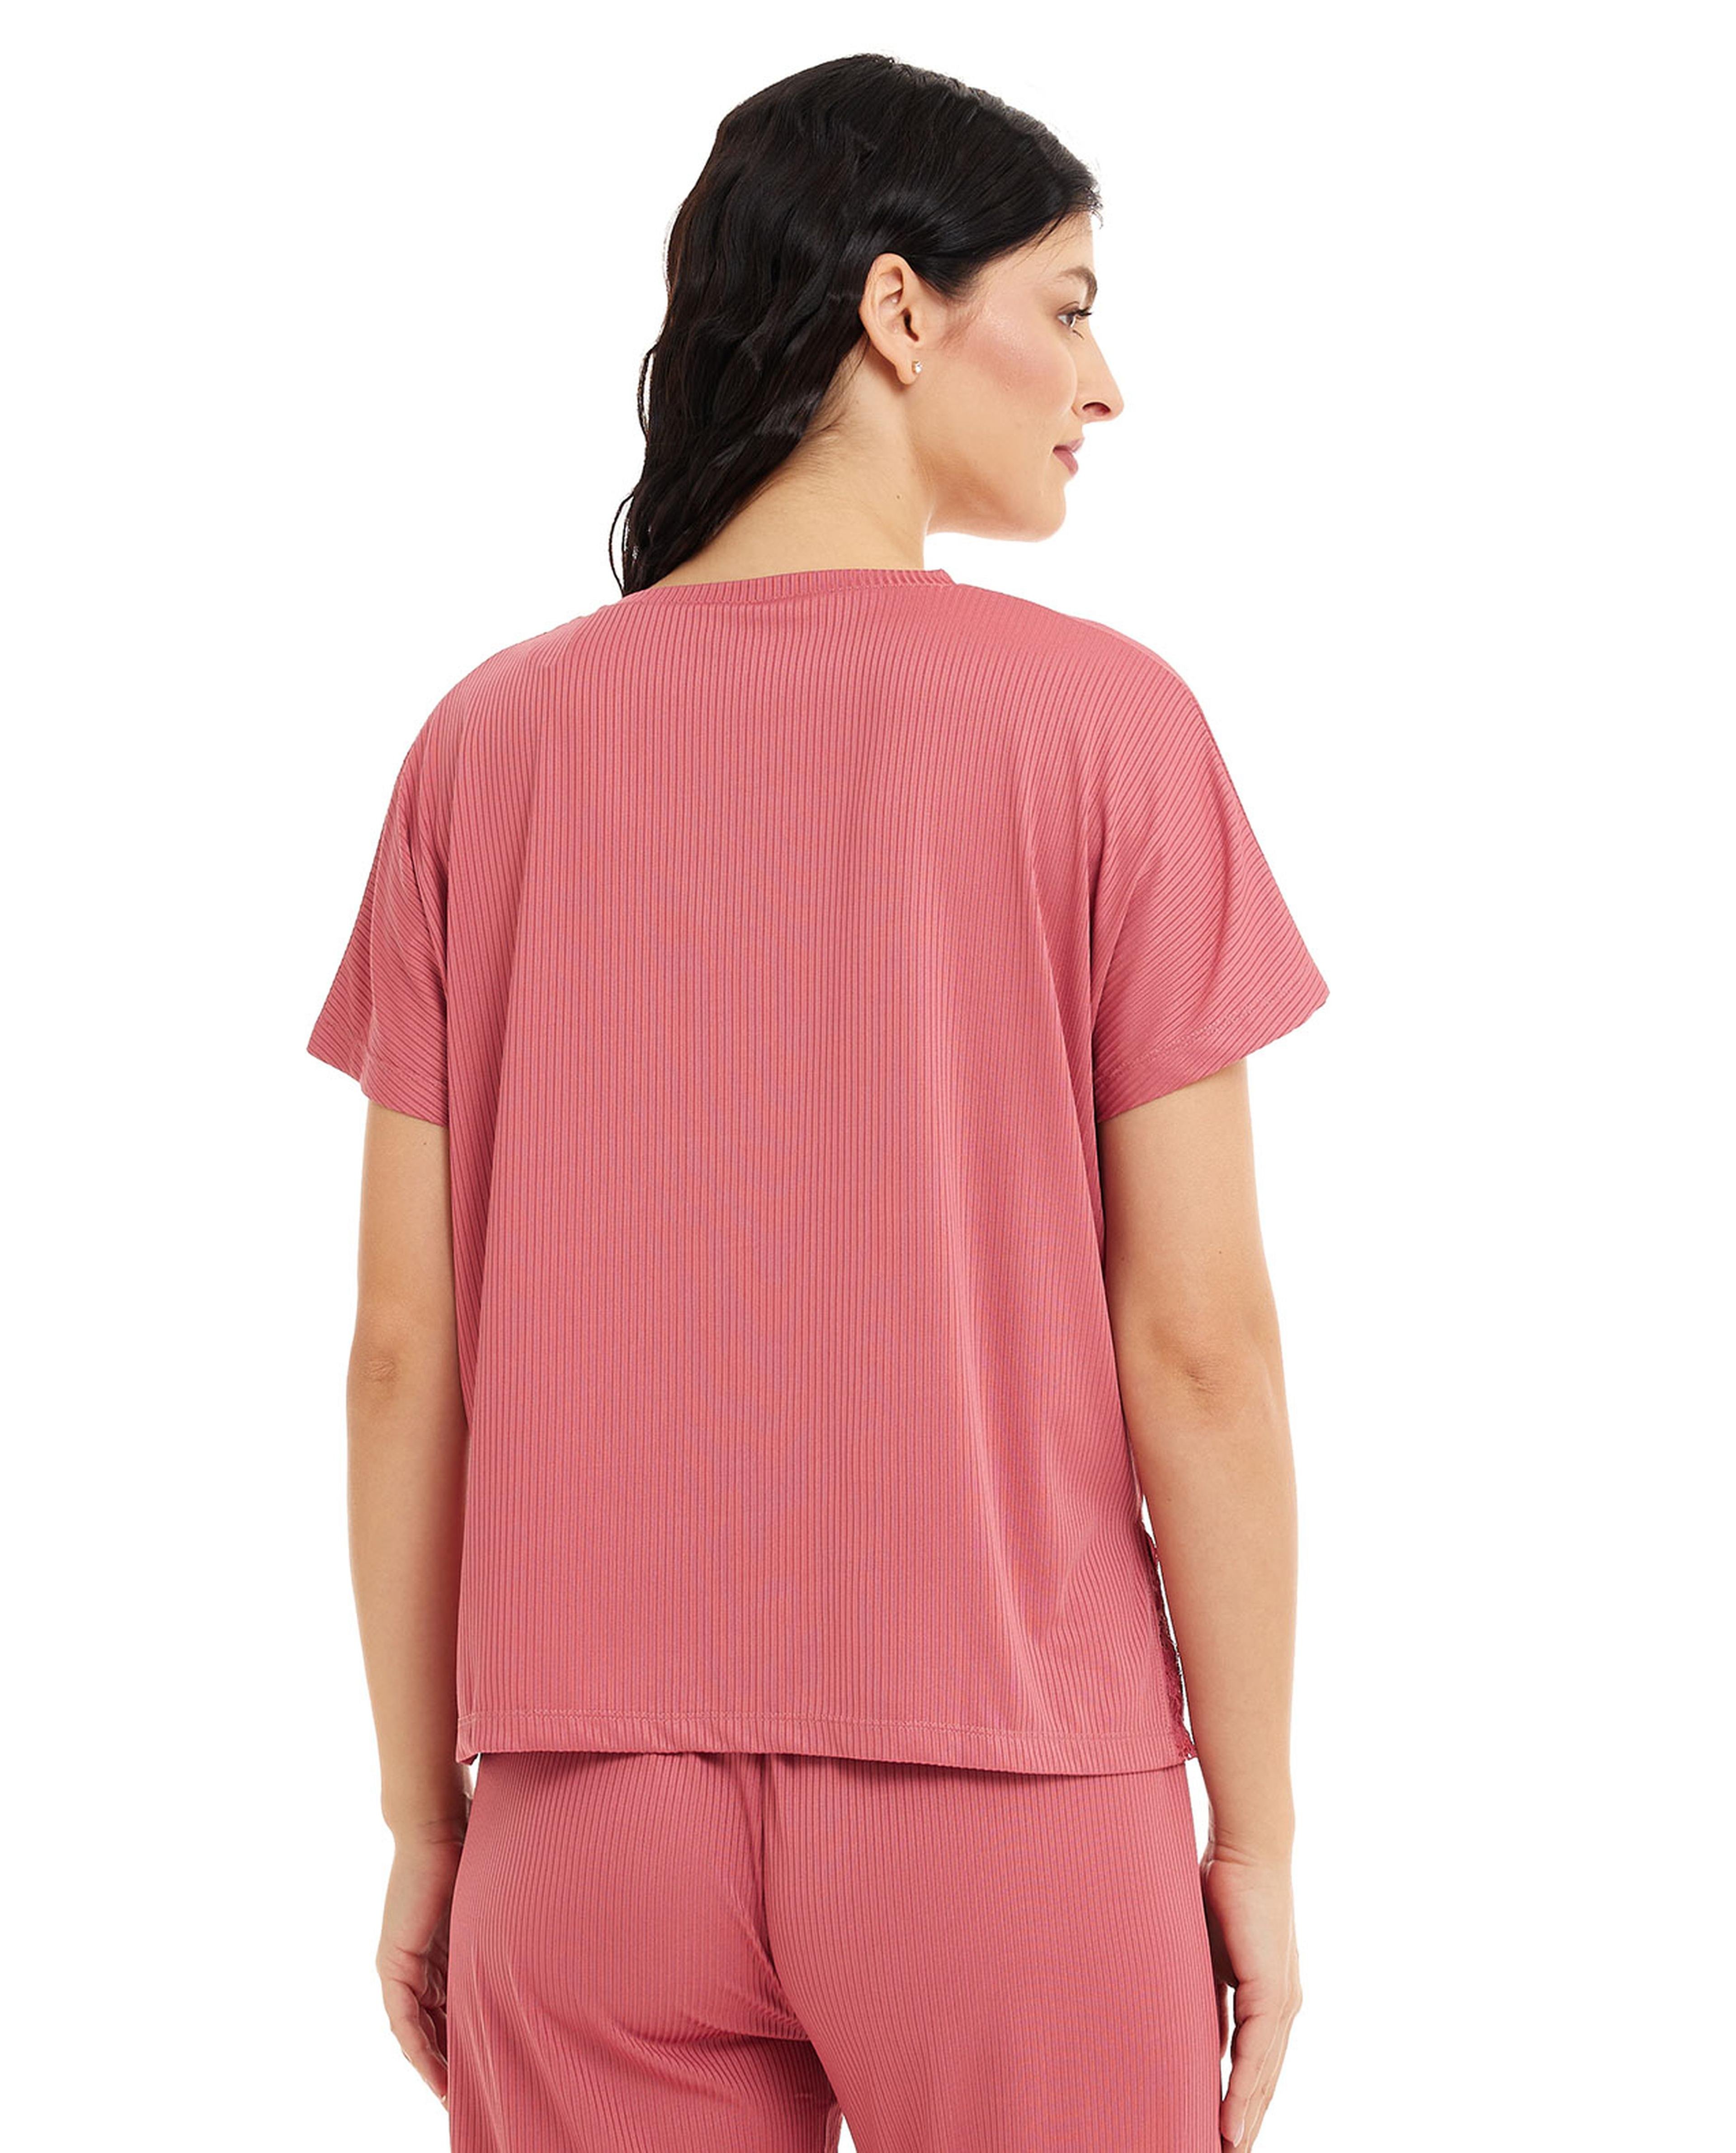 Solid Sleep Top with Crew Neck and Short Sleeves